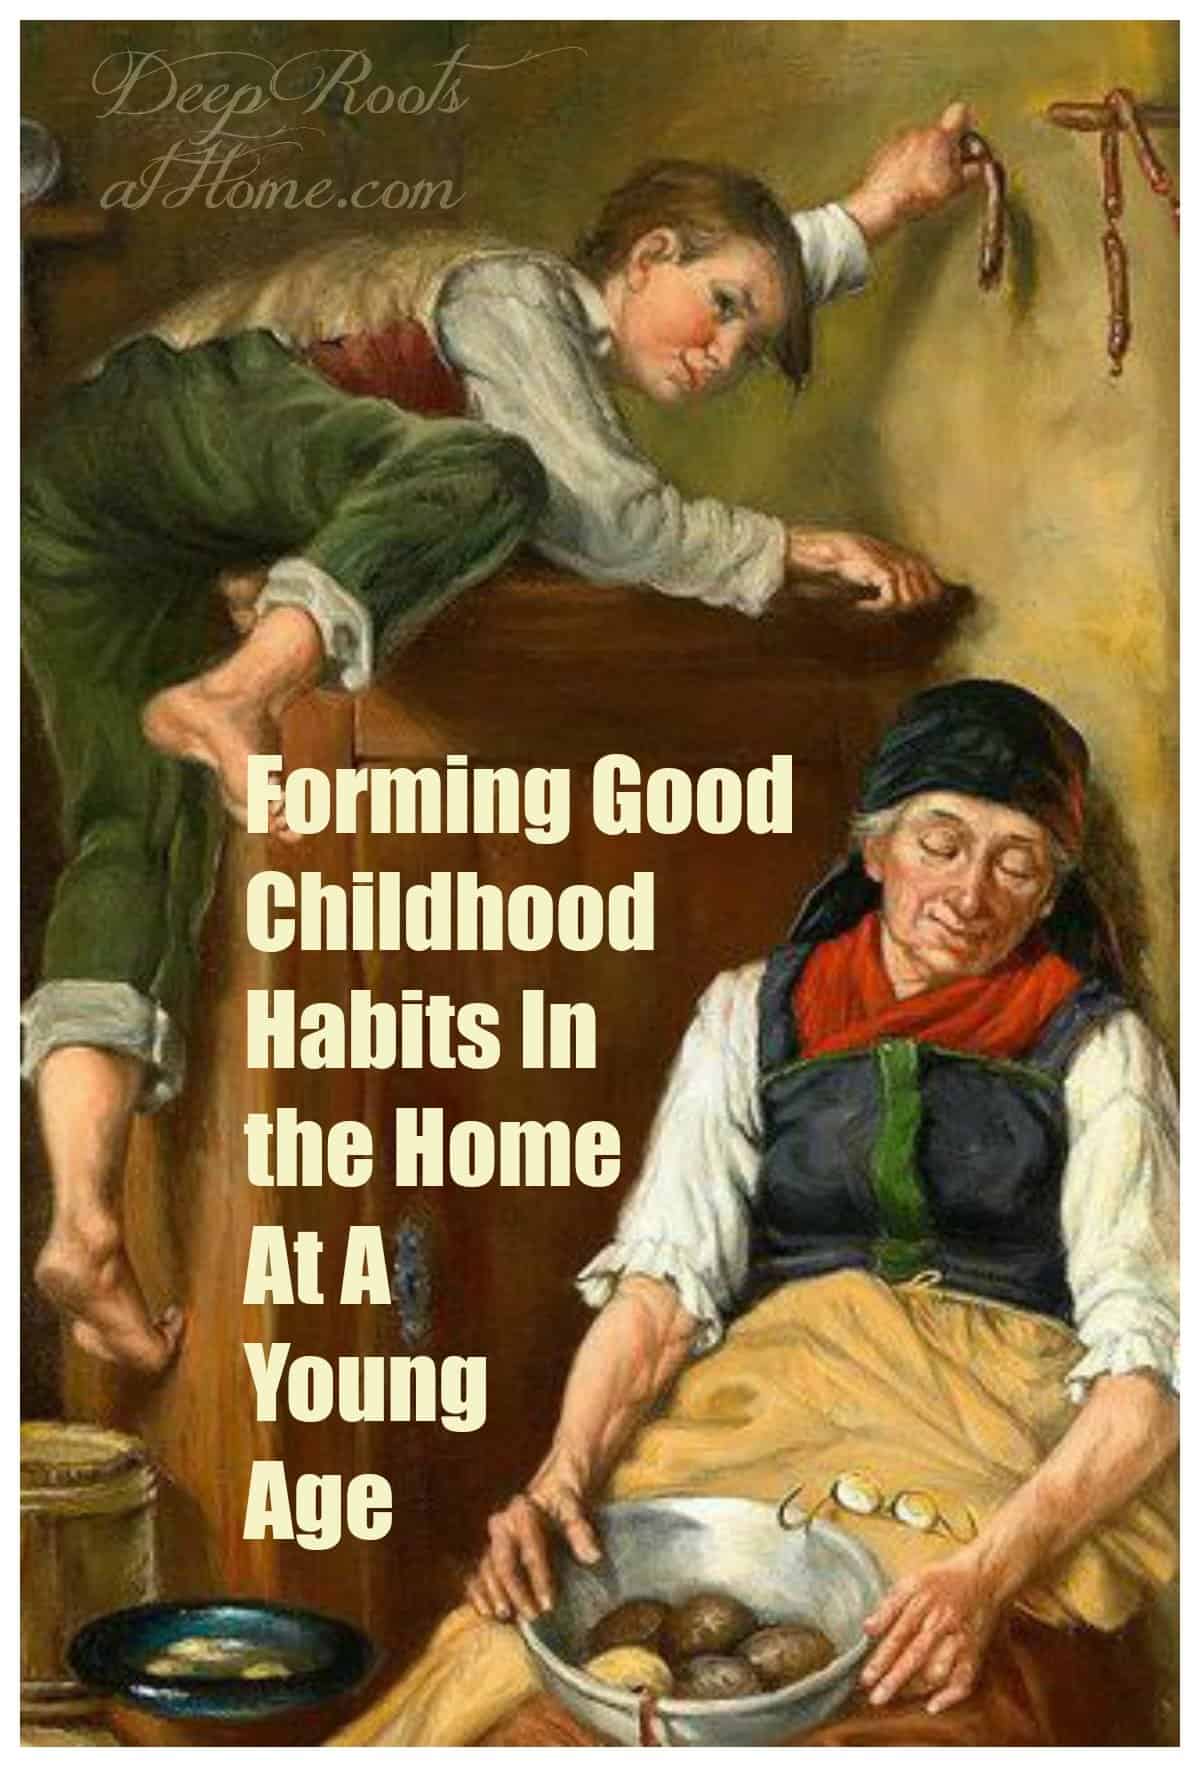 On Forming Good Childhood Habits In the Home At A Young Age. A old woman sleeping and a disrespectful boy climbing on the furniture